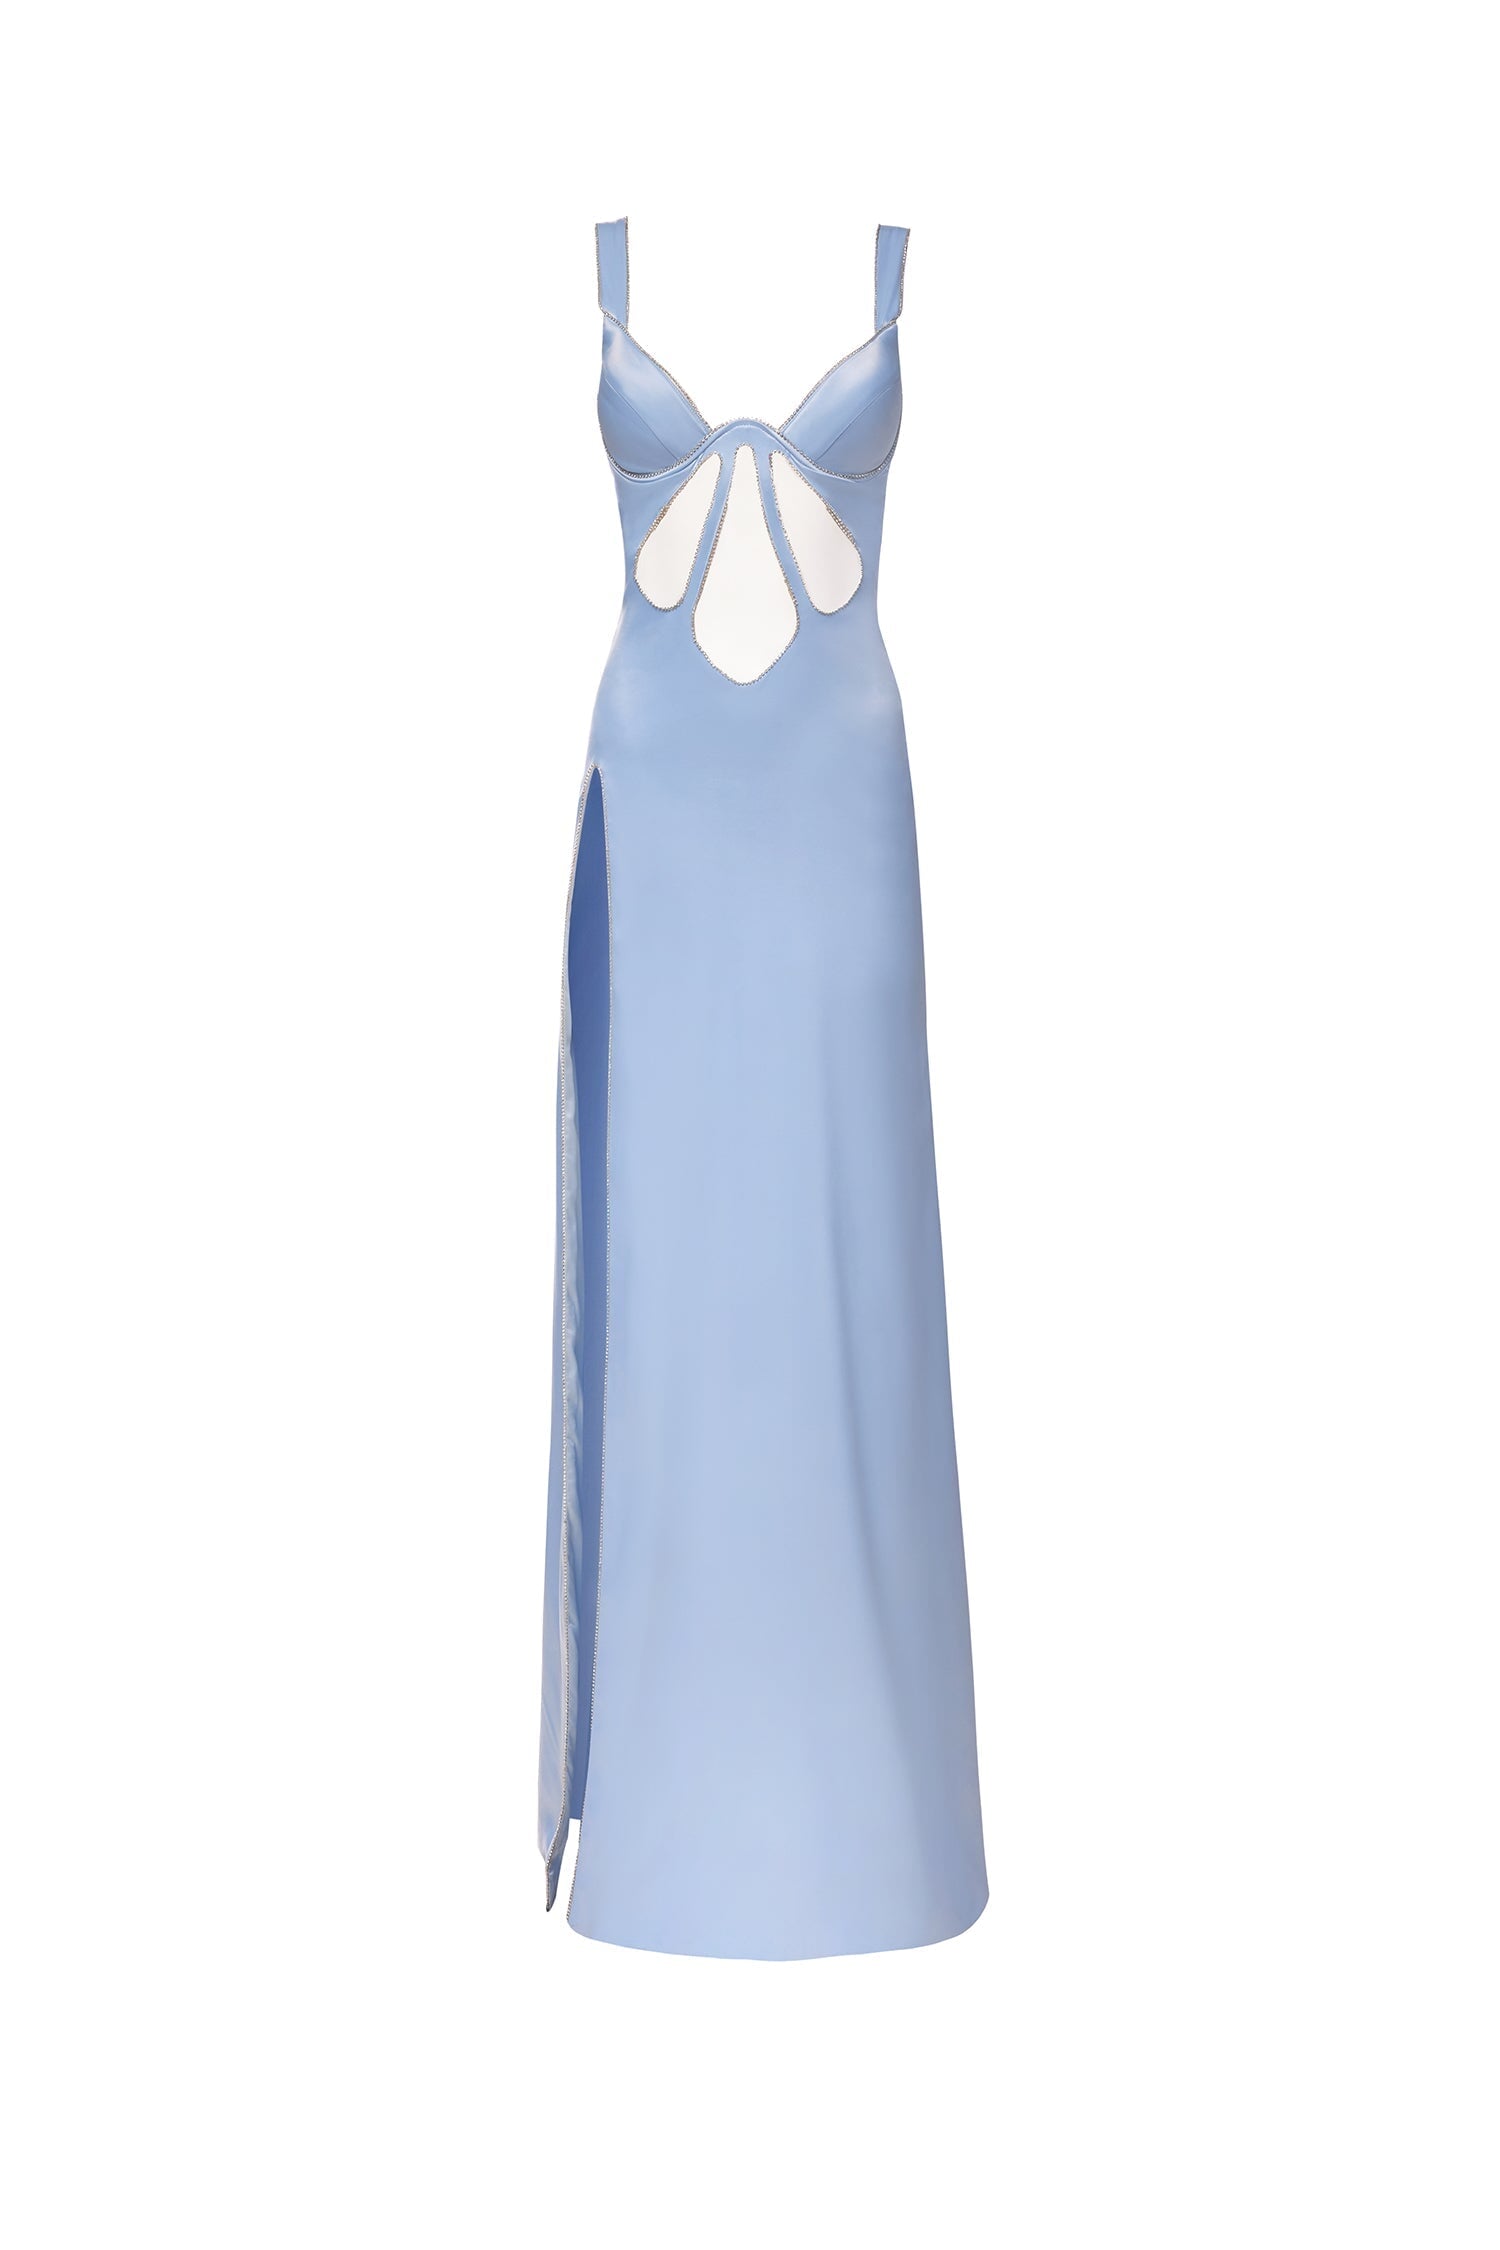 Sasha - Blue Gown with Diamante Trim | Afterpay | Zip Pay | Sezzle